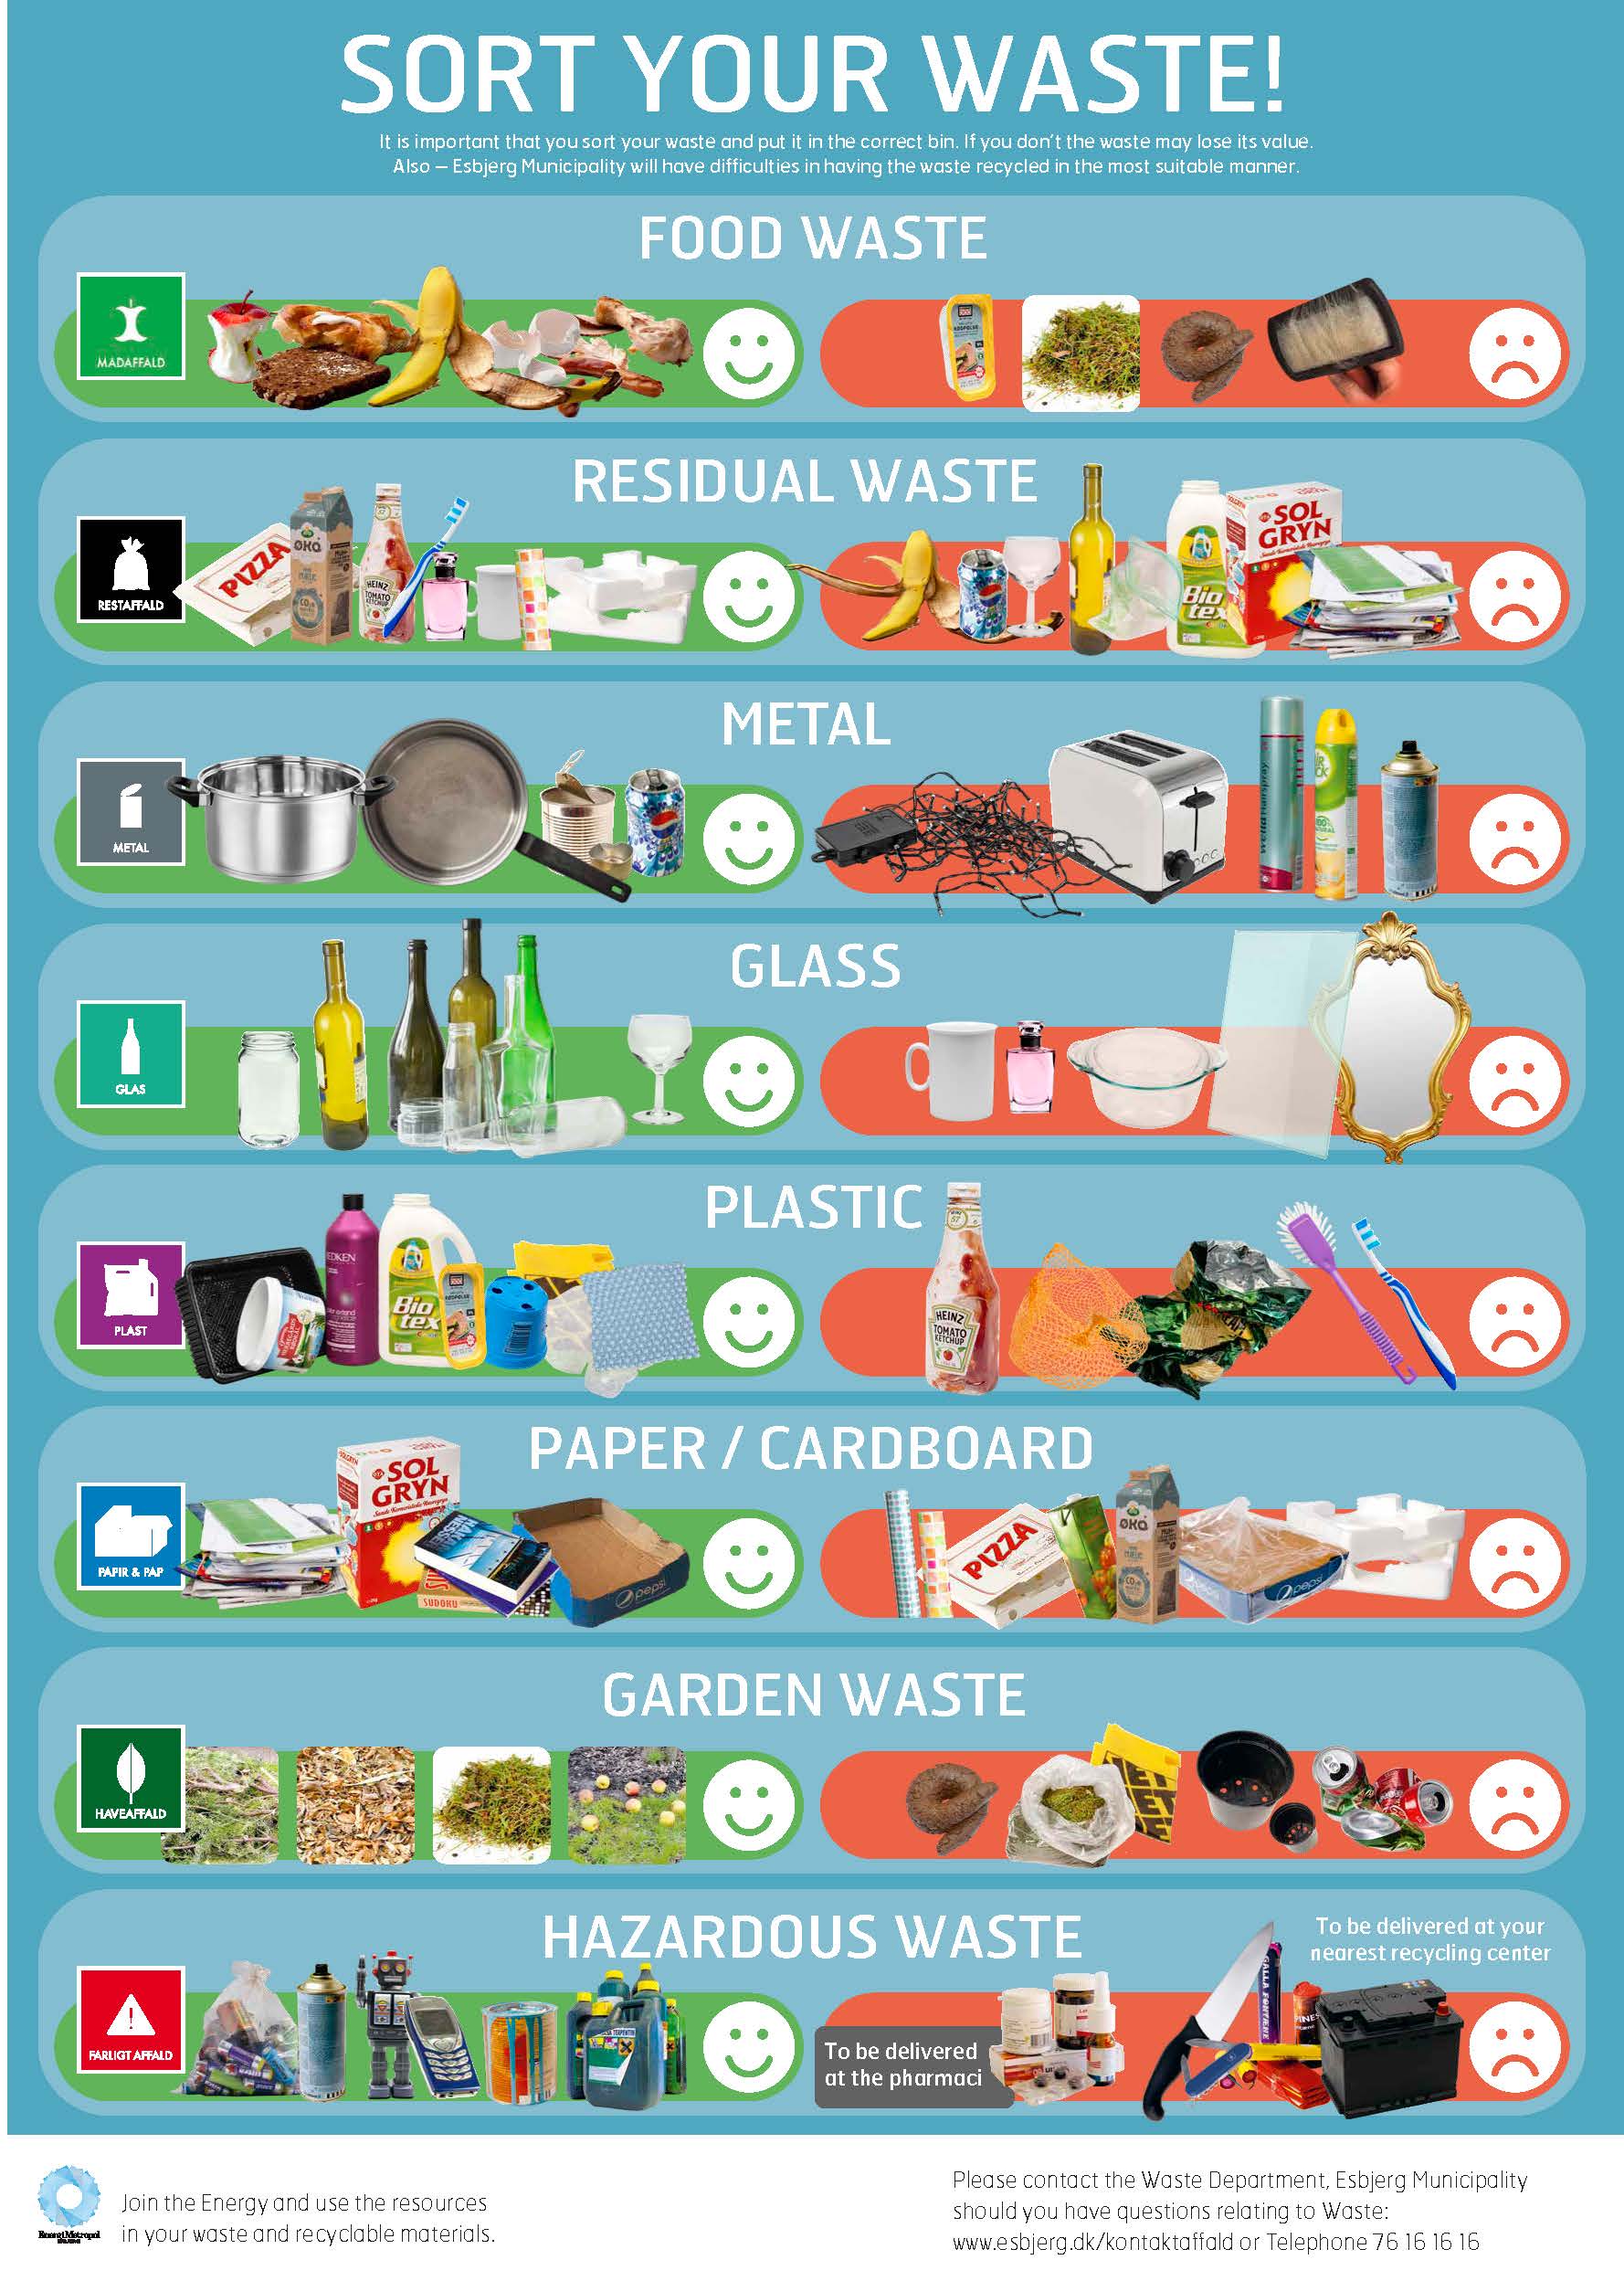 Overview poster of how to sort your waste - described in text on the page too